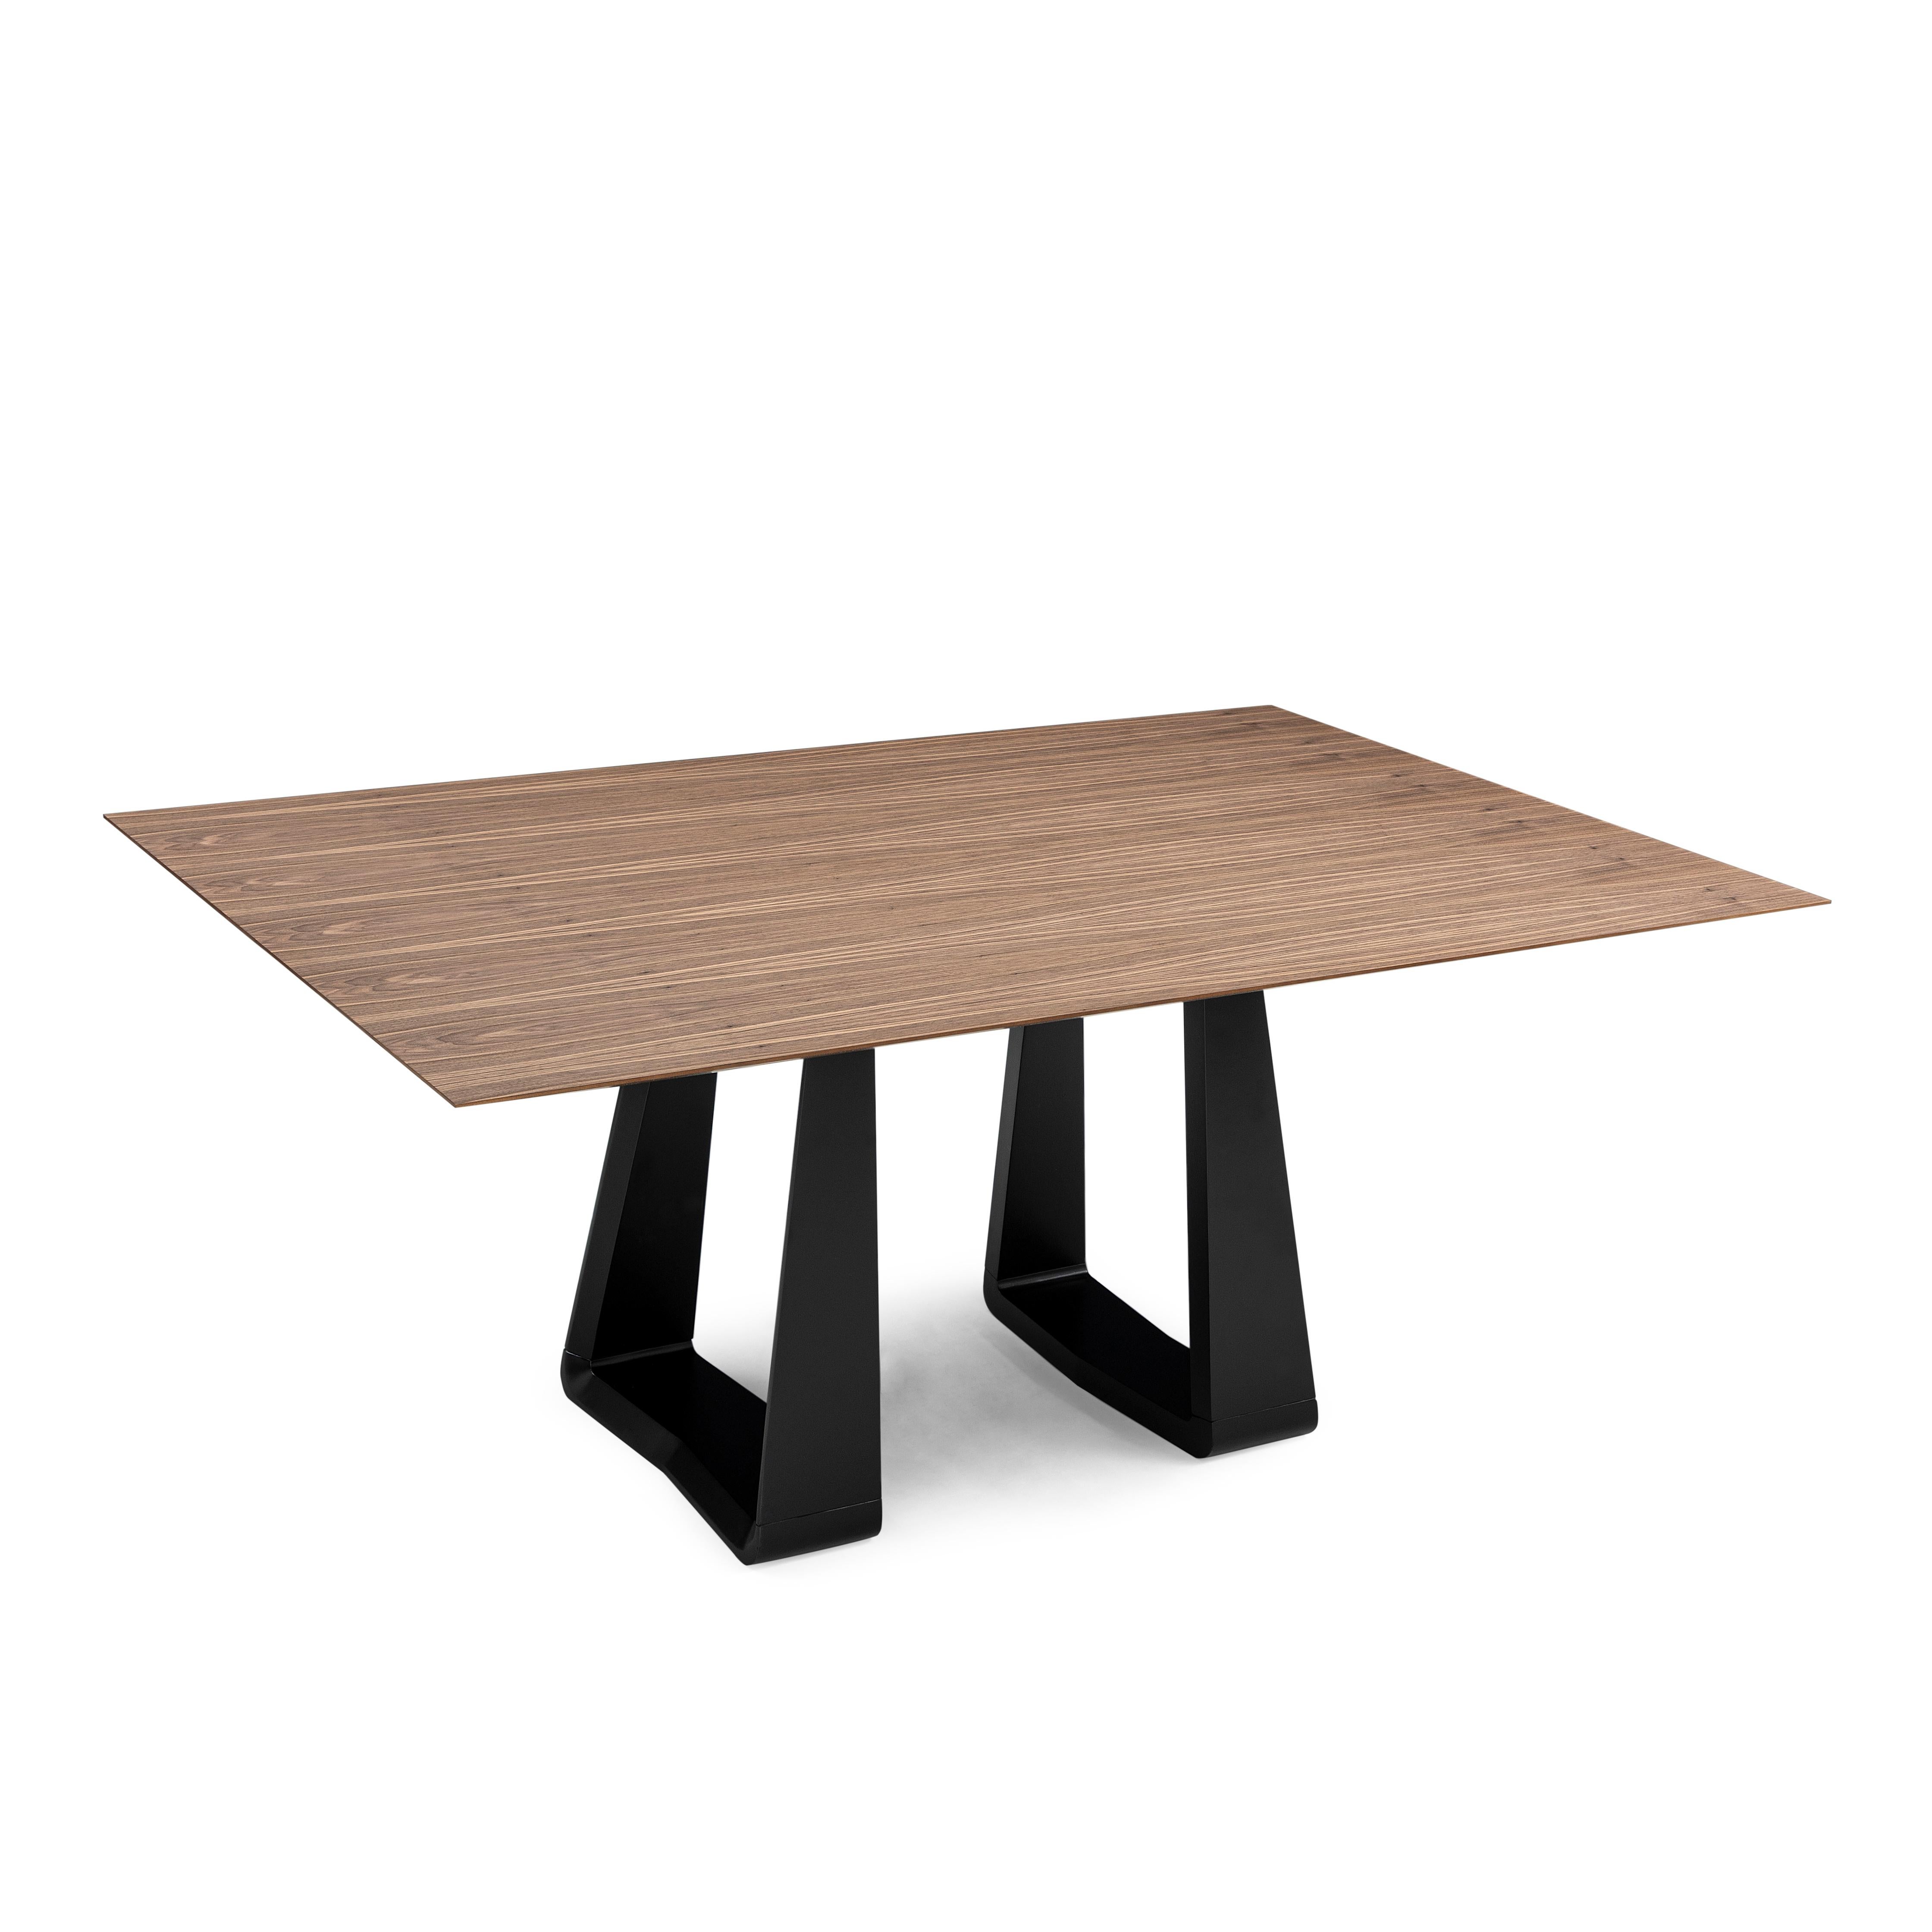 Brazilian Wing Dining Table with a Walnut Wood Veneered Table Top and Black Base 67'' For Sale